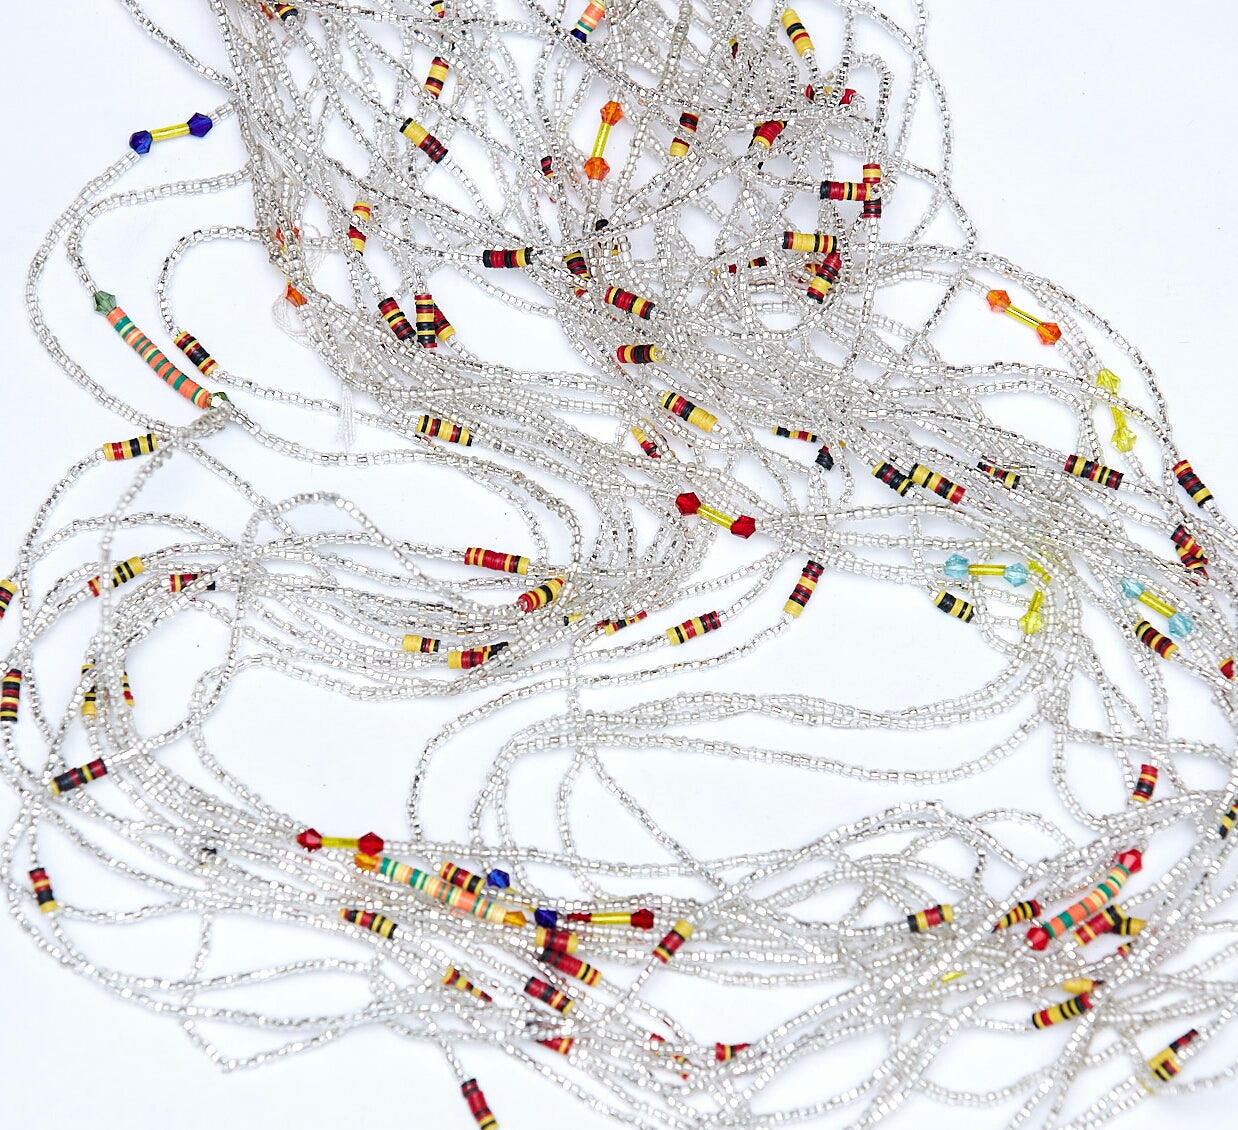 45 Inches Silver Glass Beads With Black, Yellow Red Pebble Bar Tie On waist beads